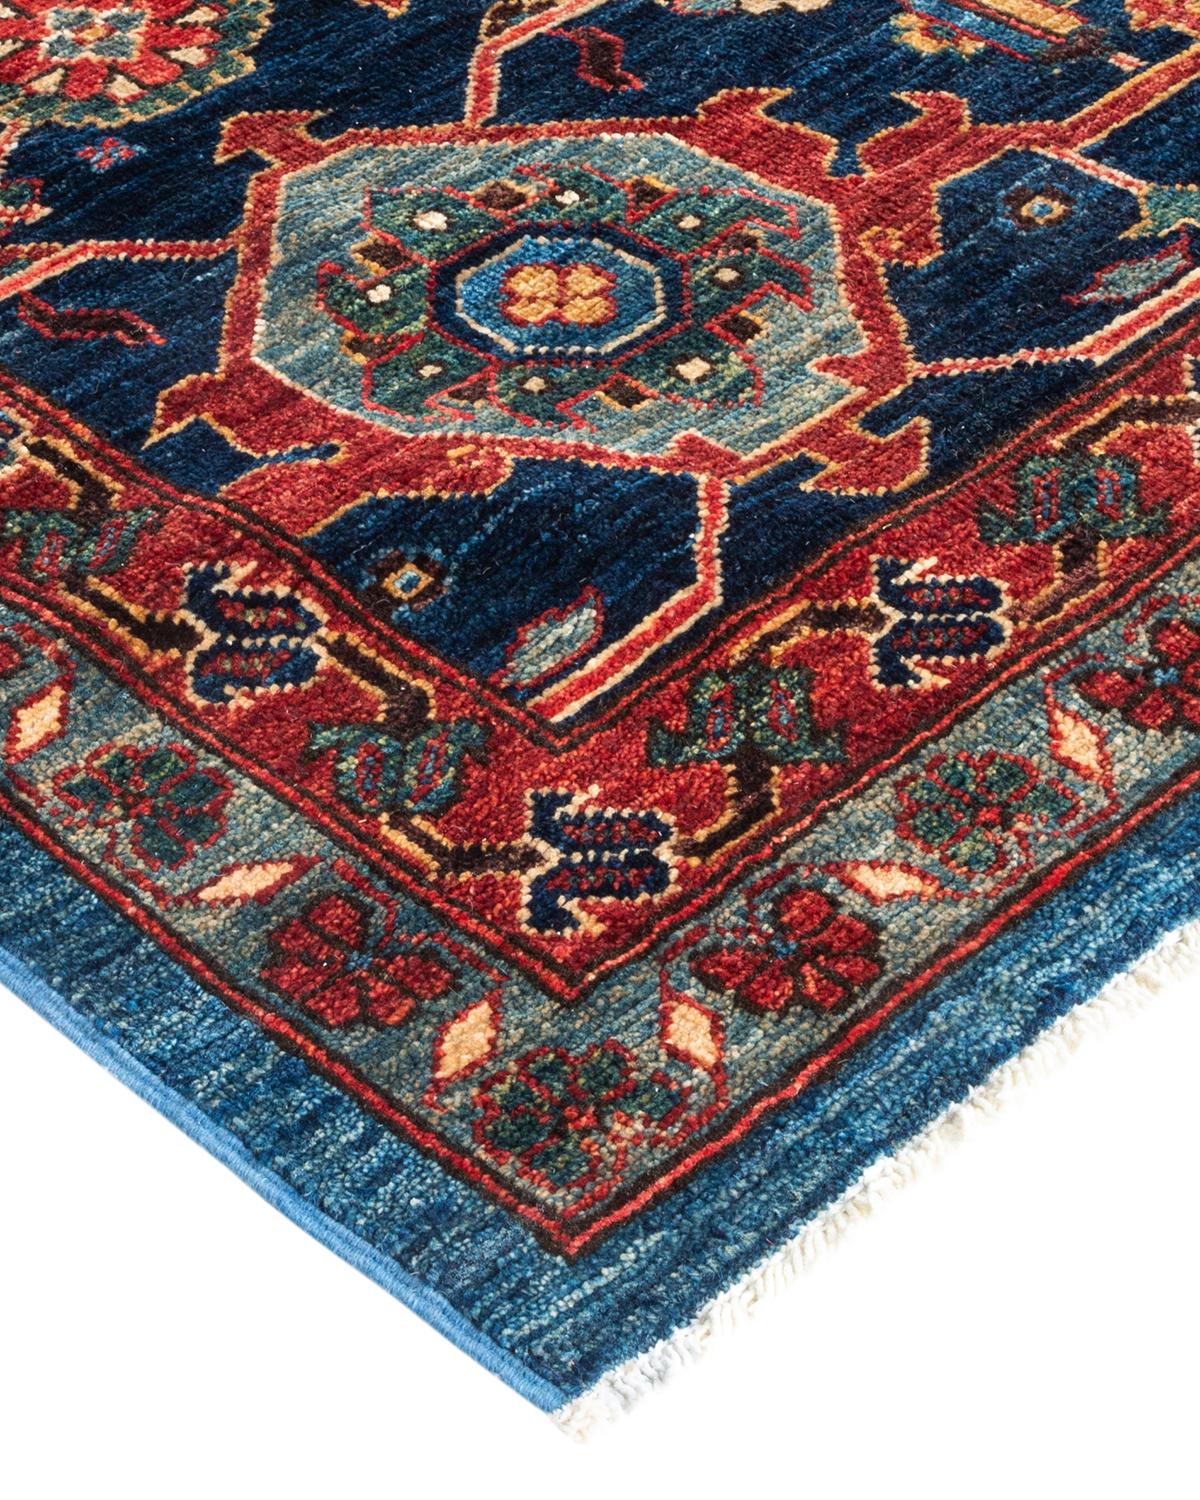 Tribal Serapi, One-of-a-kind Hand-Knotted Runner Rug, Light Blue